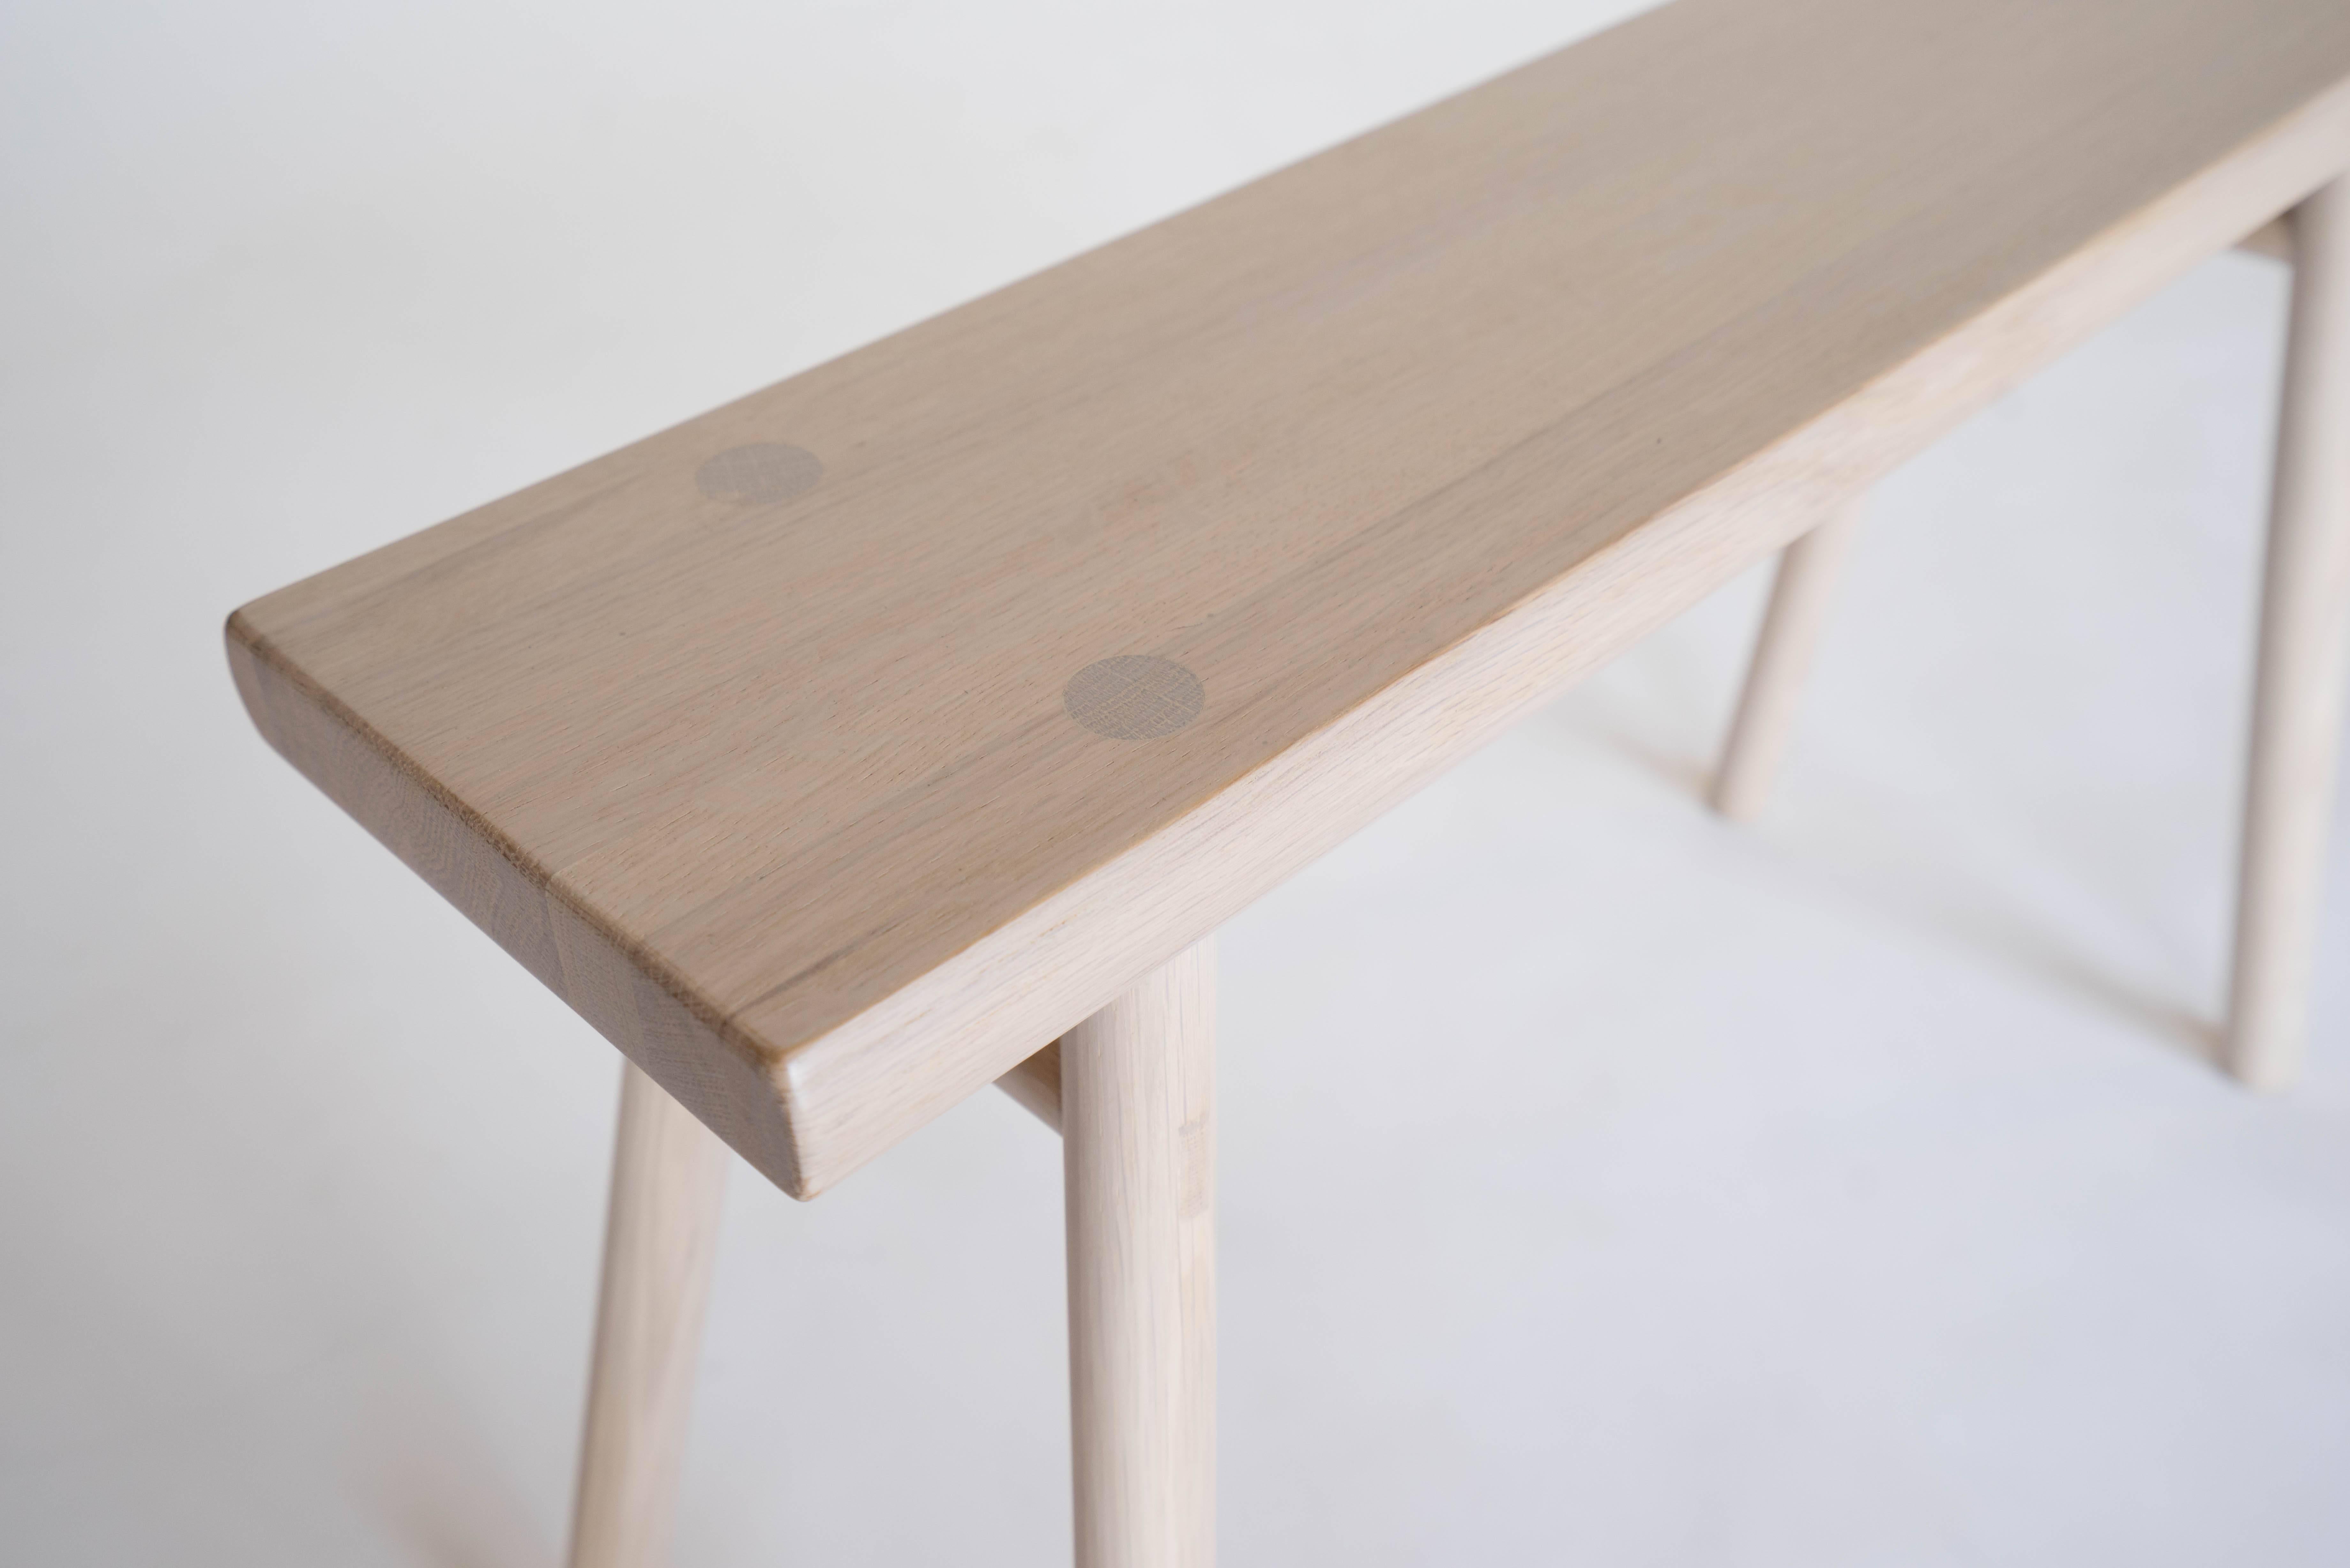 Chinese Wing Stand by Sun at Six, Nude: Minimalist Stool / Bench / Side Table in Wood